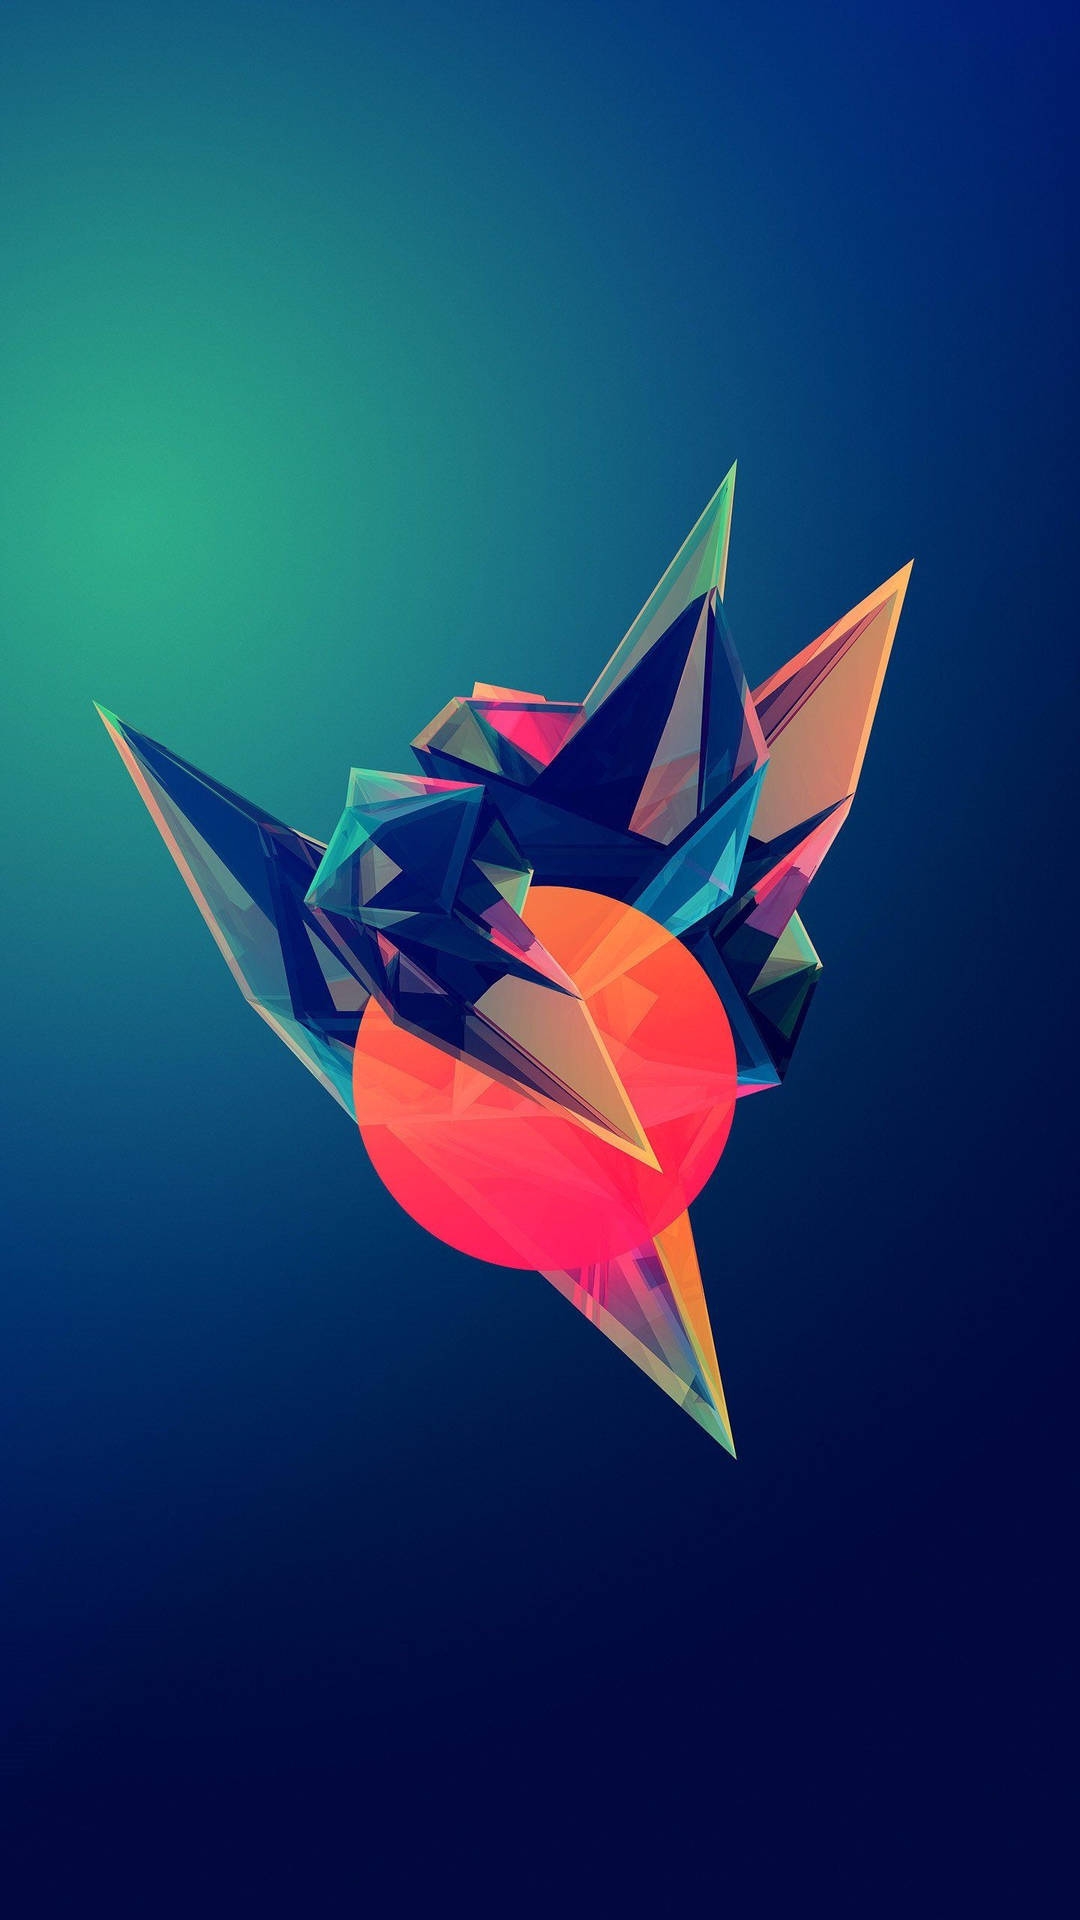 Sharp Low Poly Origami Background